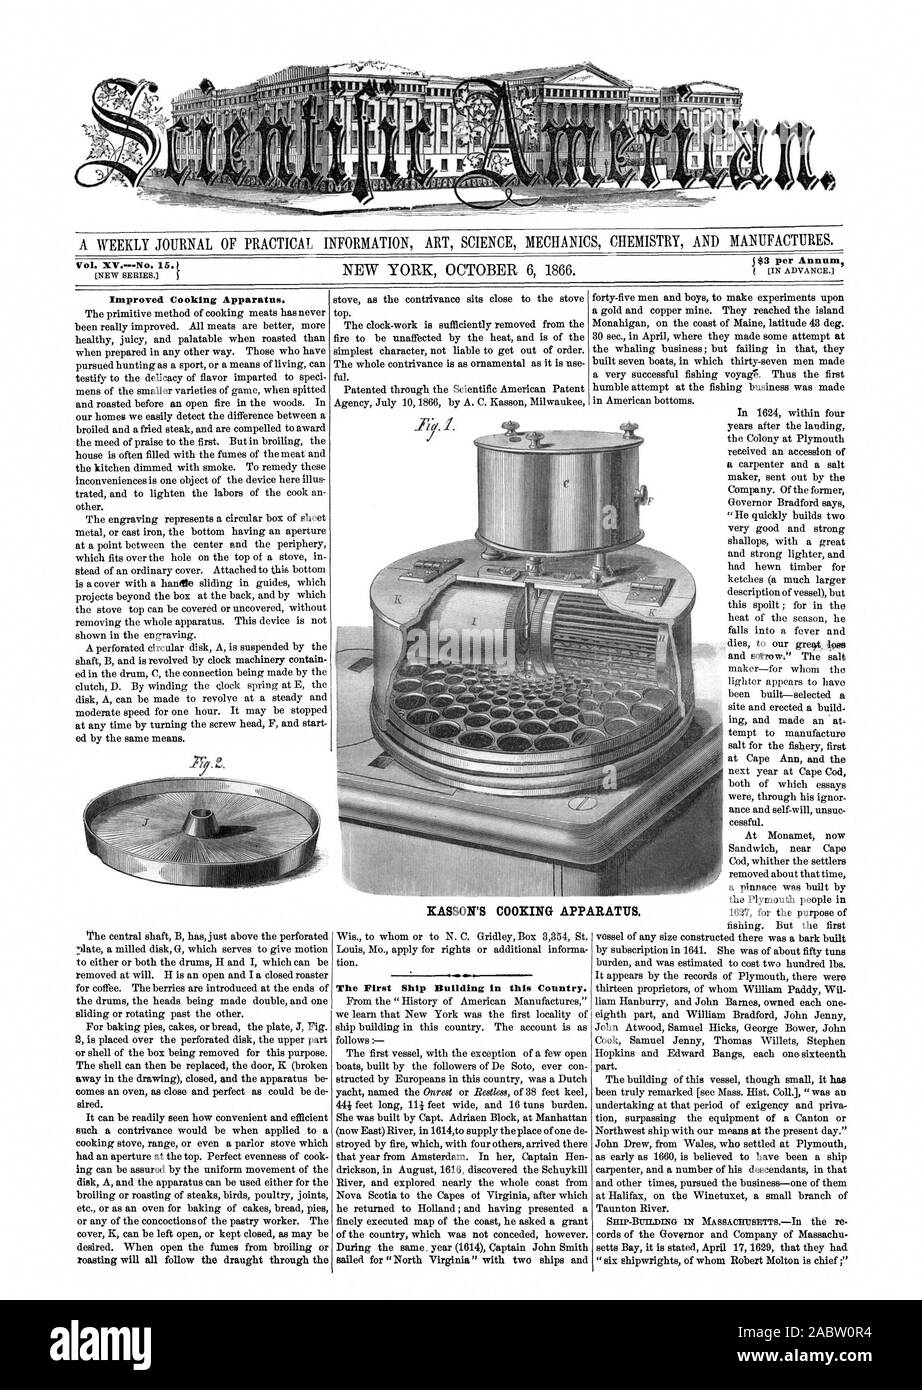 A WEEKLY JOURNAL OF PRACTICAL INFORMATION ART SCIENCE MECHANICS CHEMISTRY AND MANUFACTURES. Vol. XV.No. 15. I [NEW SERIES. Improved Cooking Apparatus. The First Ship Building in this Country. KASSON S COOKING APPARATUS., scientific american, 1866-10-06 Stock Photo